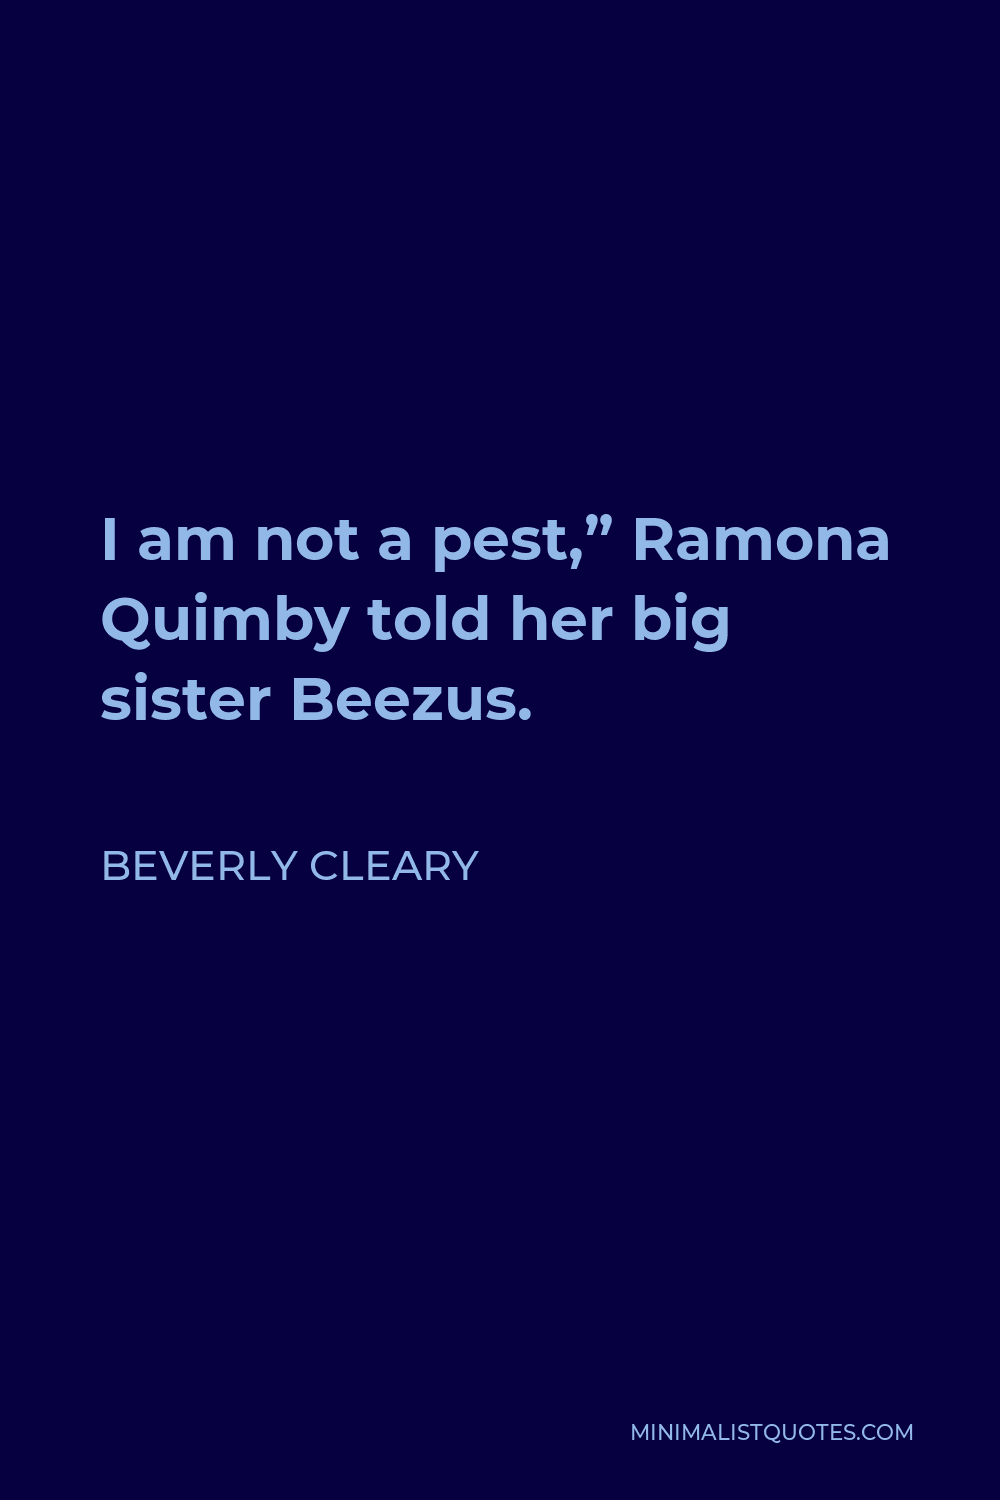 Beverly Cleary Quote - I am not a pest,” Ramona Quimby told her big sister Beezus.